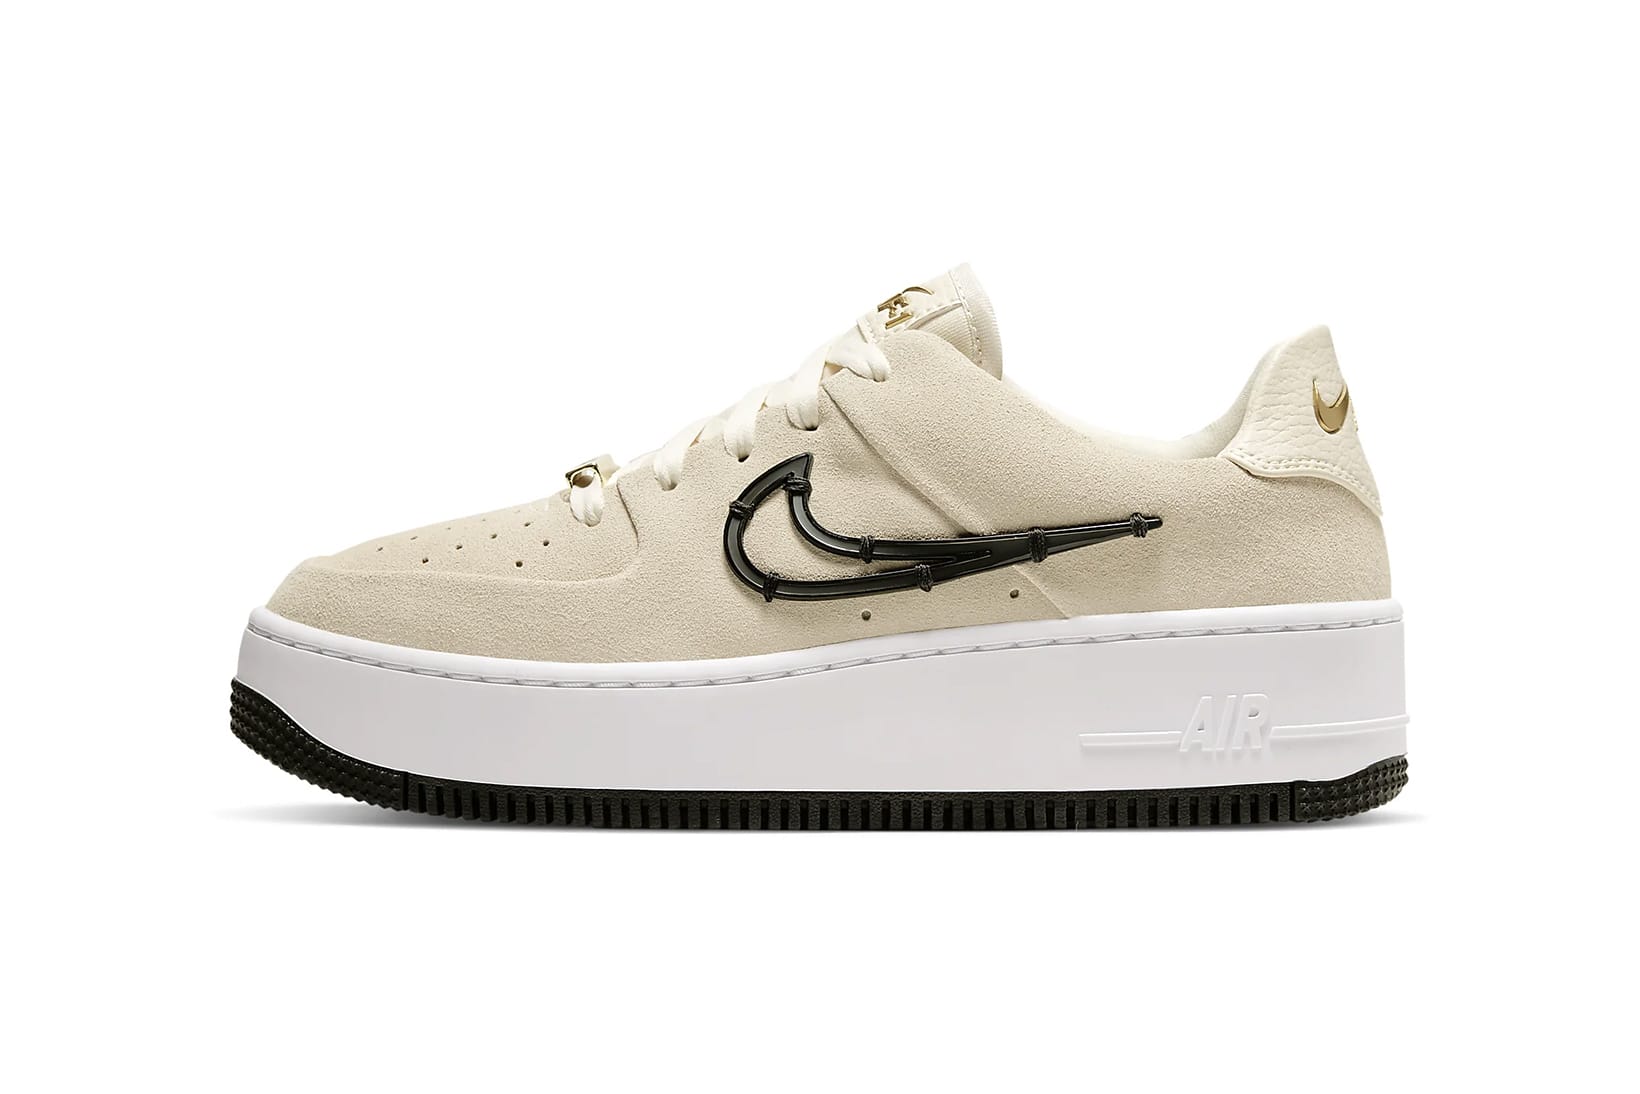 air force 1 womens white low